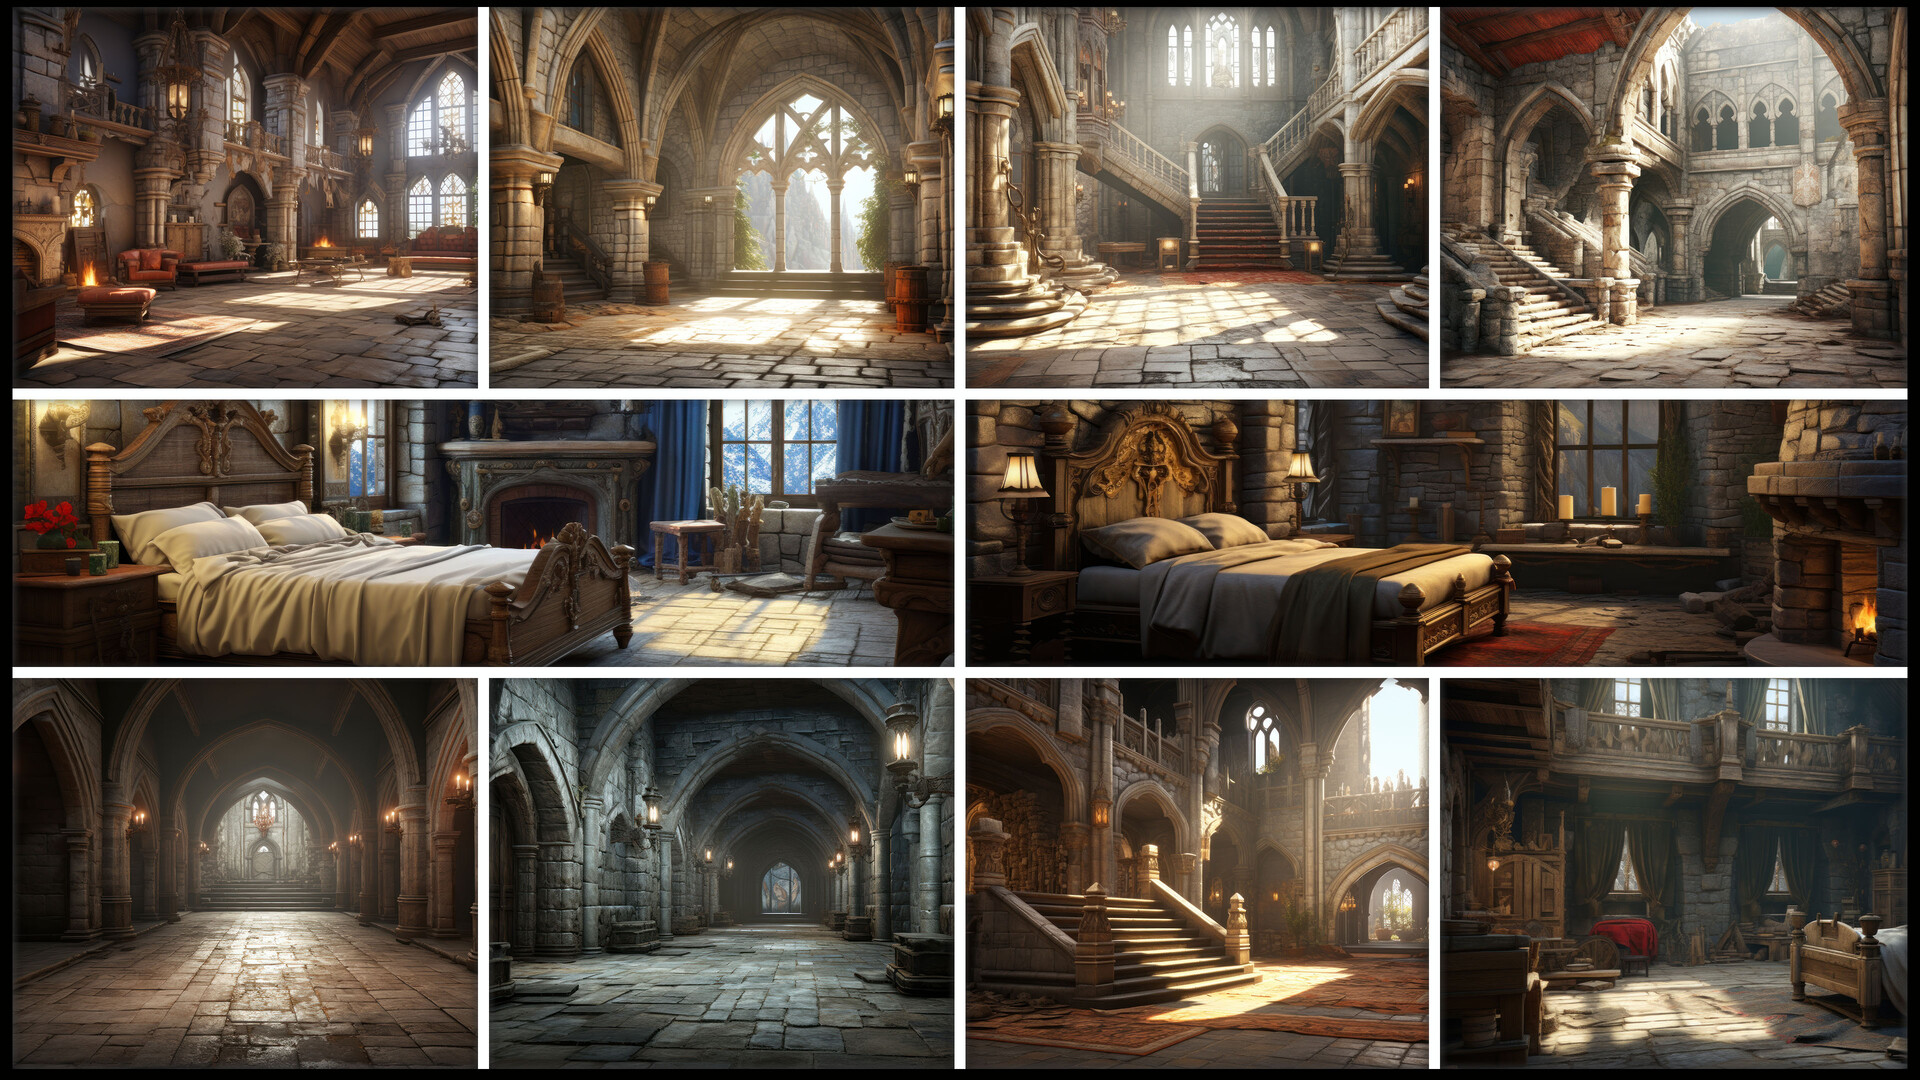 ArtStation - 850+ Castles and Fortresses Reference Pictures